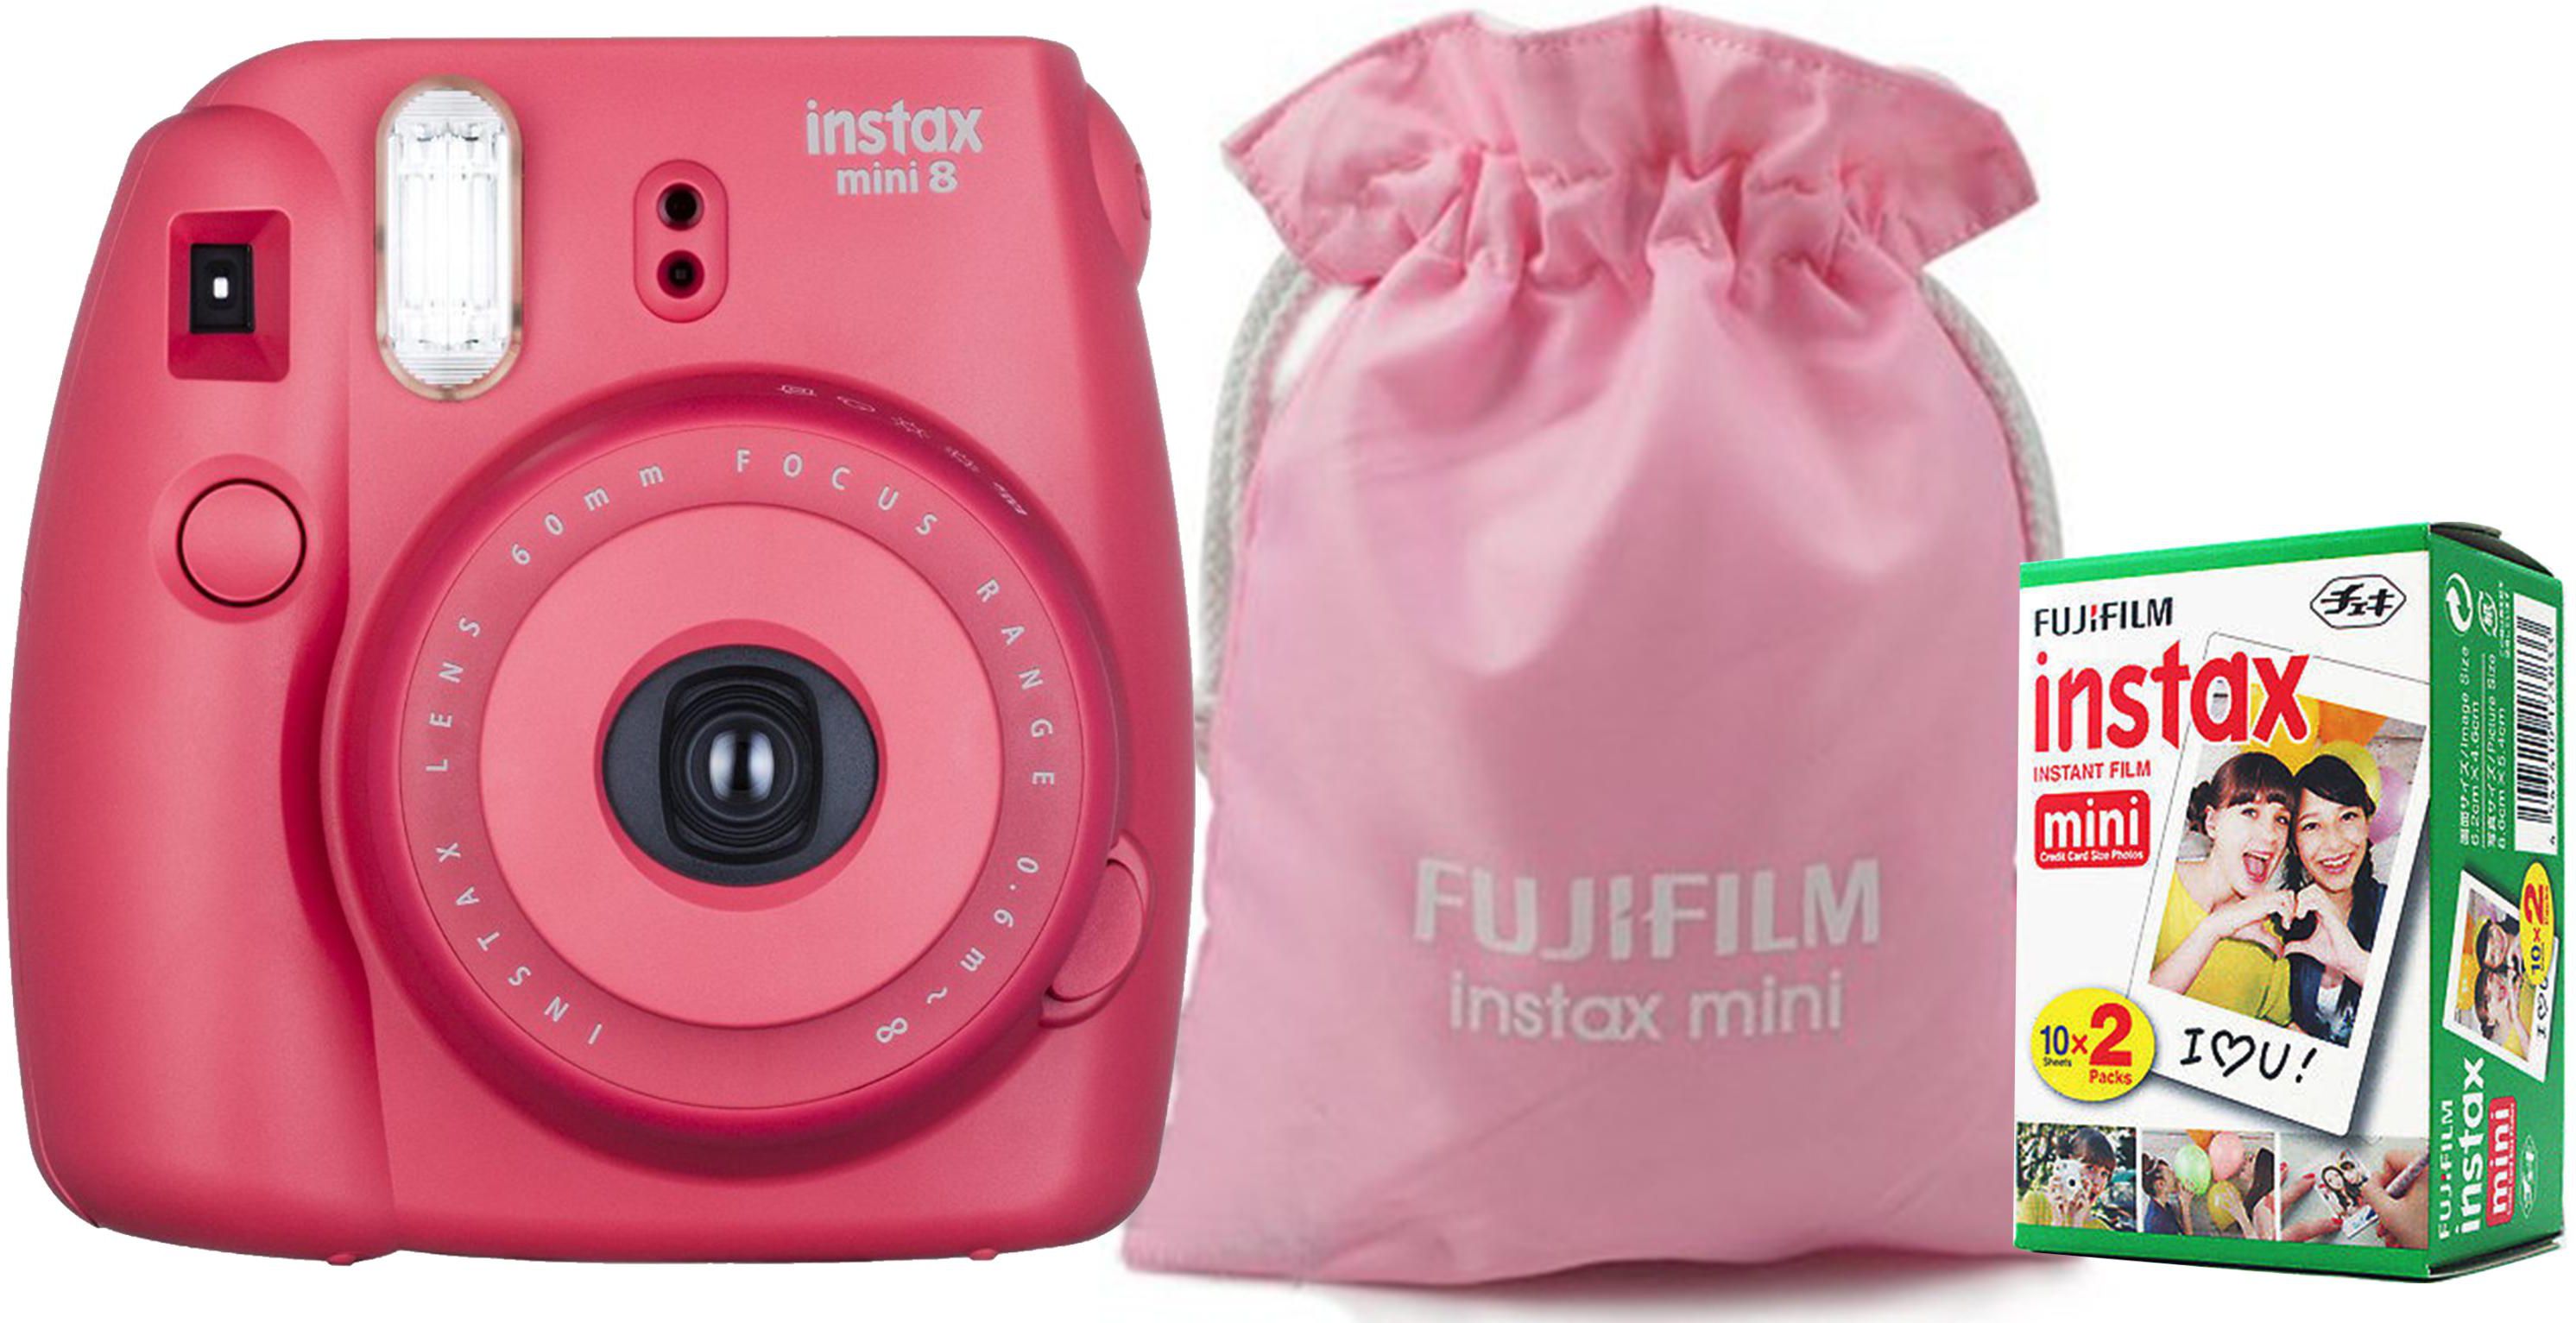 Fujifilm Instax Mini 8 Instant Film Camera Red with Pink Pouch and 20 Film Sheet